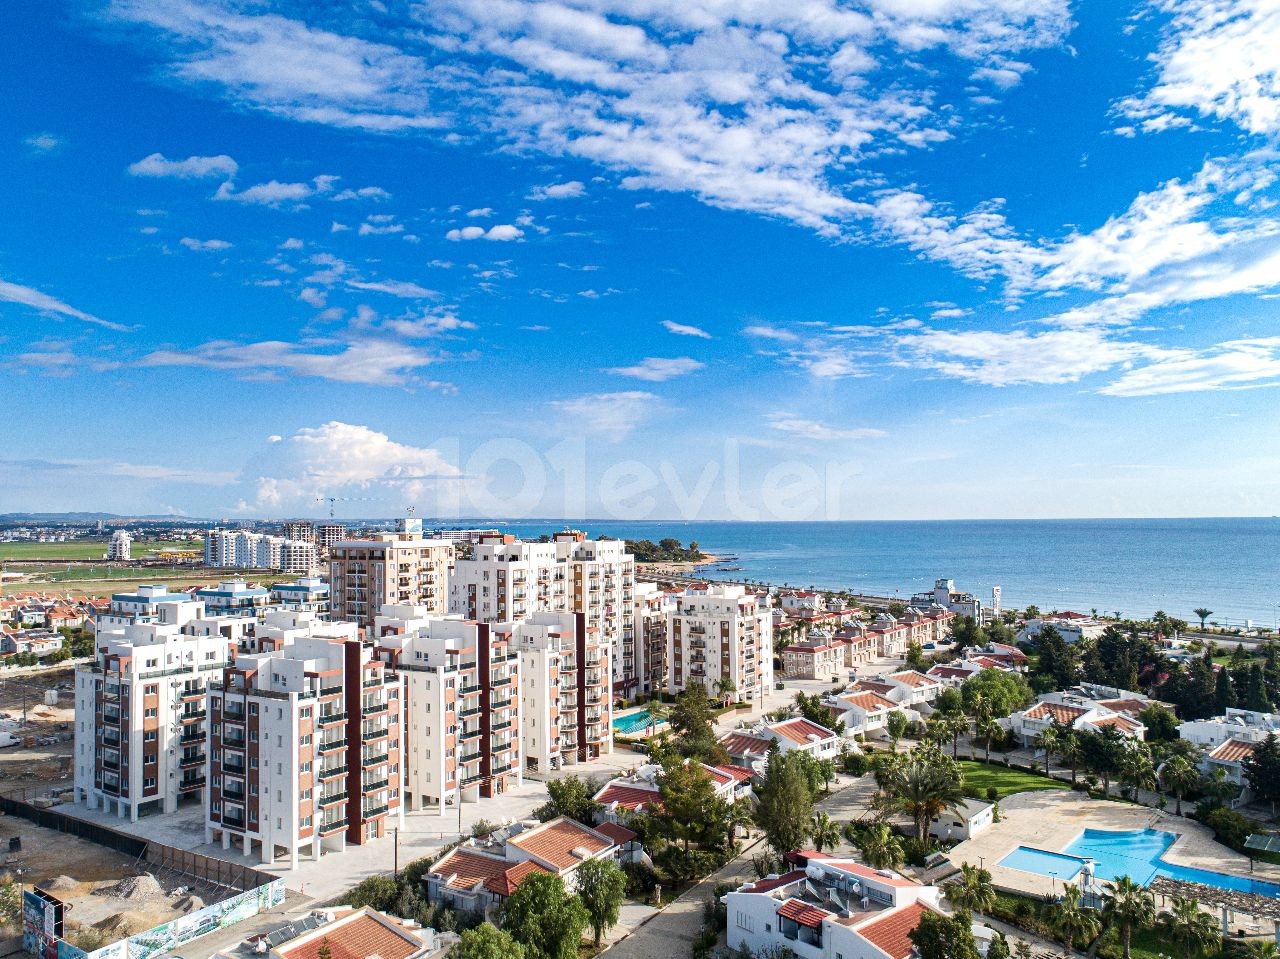 Great Price On This 1+1 Flat 2 Minutes Walking To The Beach!